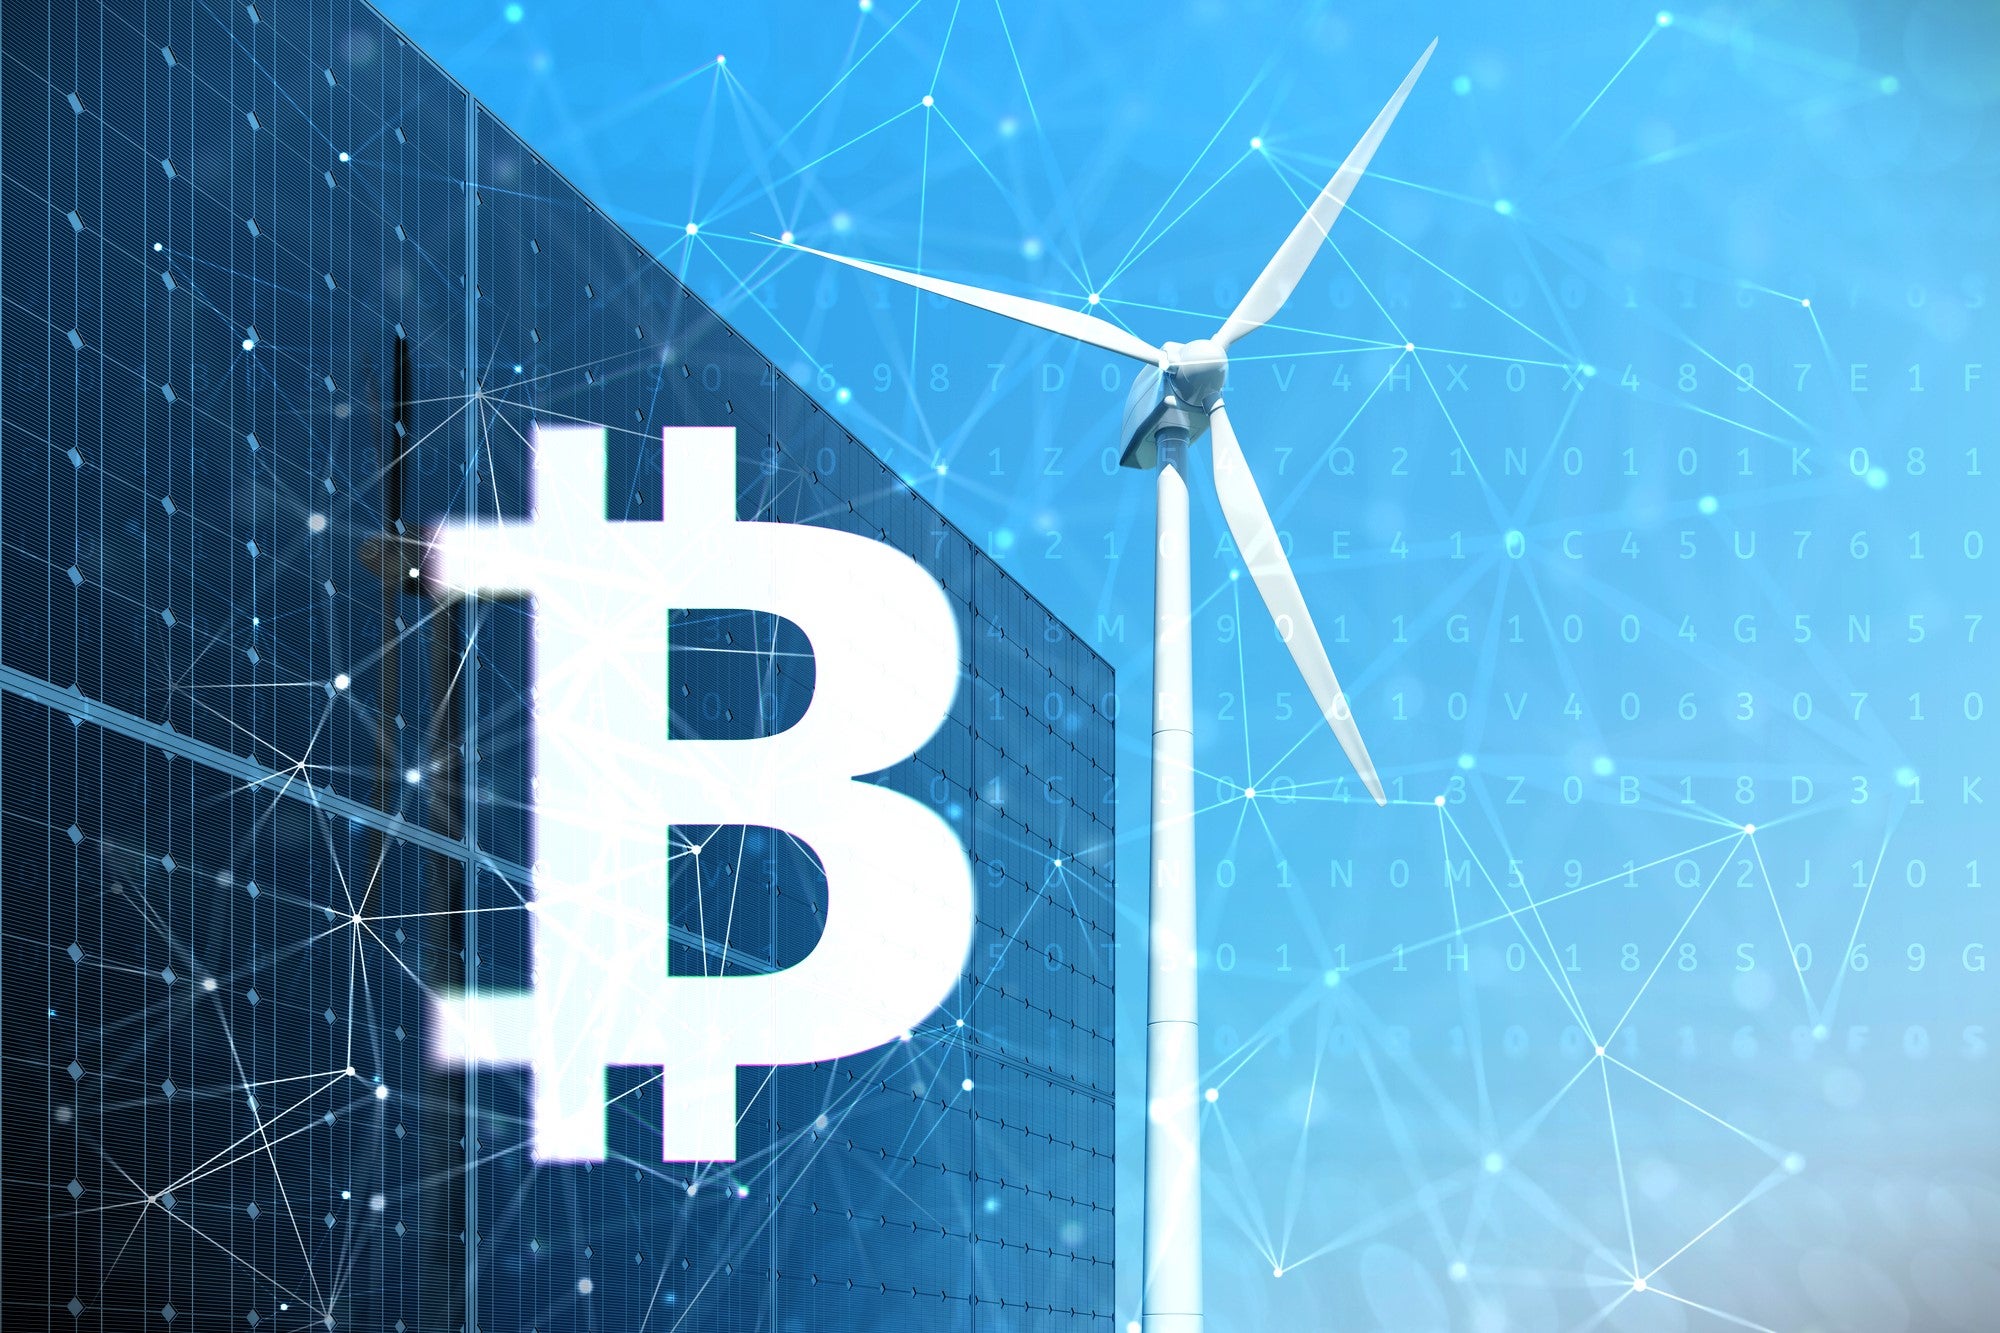 Bitcoin mining uses vast amounts of electricity, which could be sourced from solar and wind energy projects during periods of over production